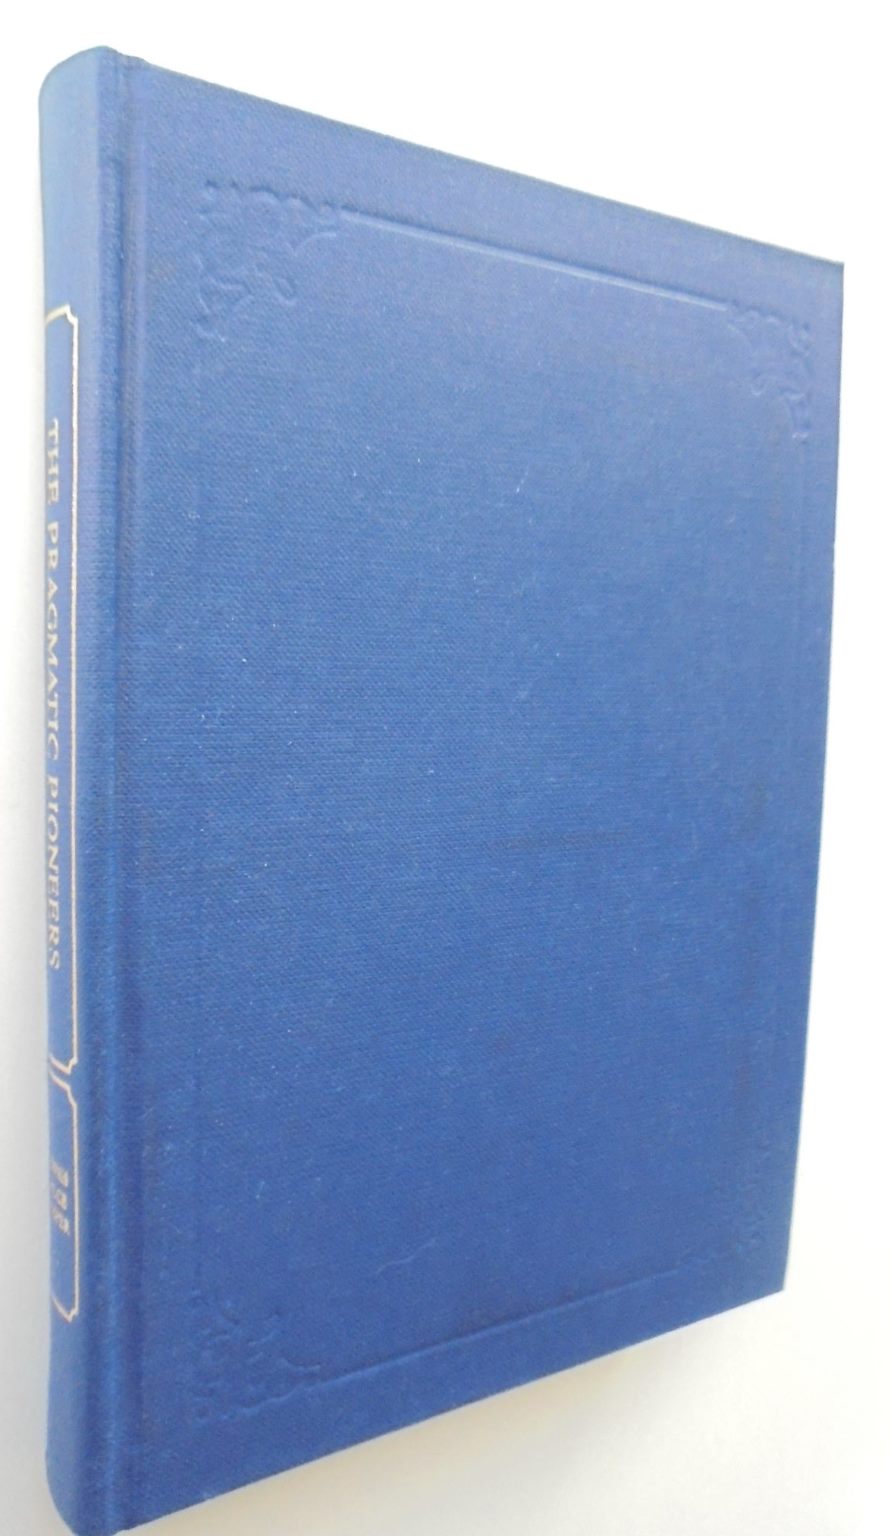 The Pragmatic Pioneers by Dennis Bruce Gosper. SIGNED BY AUTHOR FIRST LIMITED EDITION OF 400 COPIES, of which this number 26. VERY SCARCE.